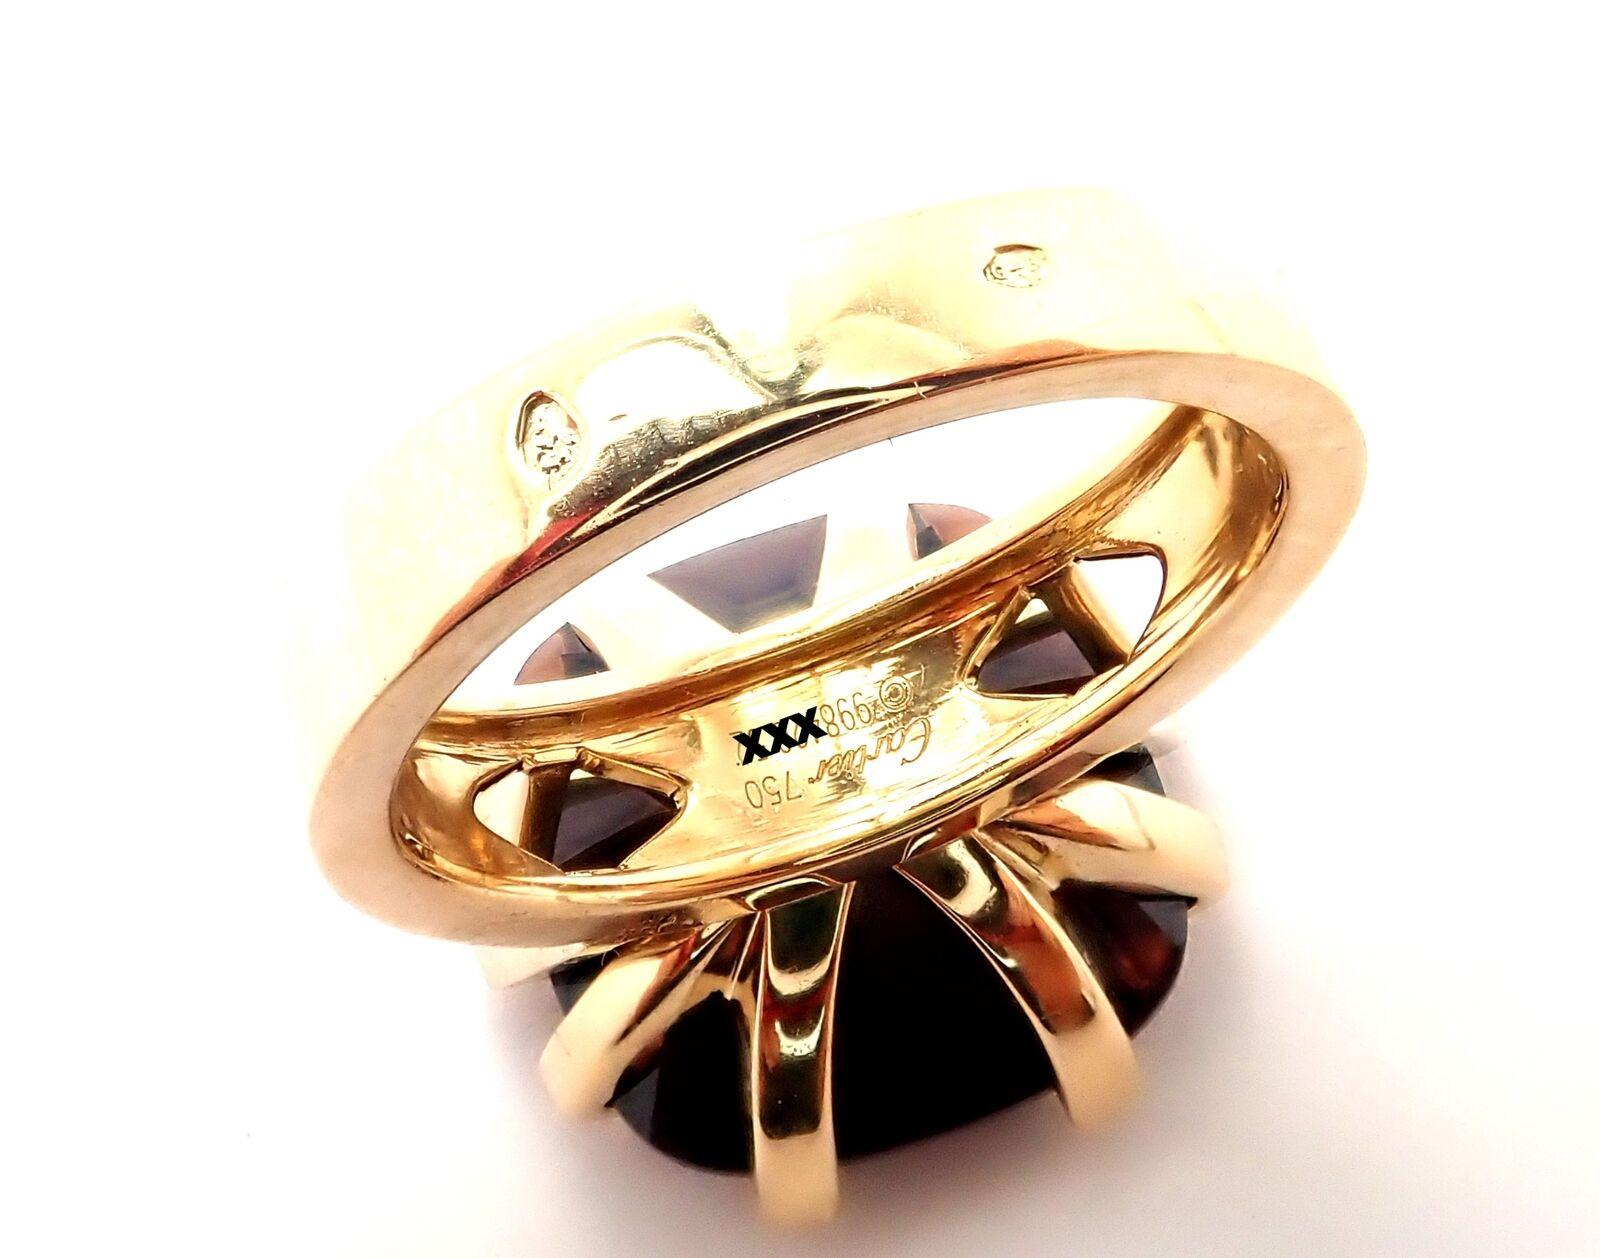 Cartier Le Baiser du Dragon Garnet Yellow Gold Ring In Excellent Condition For Sale In Holland, PA